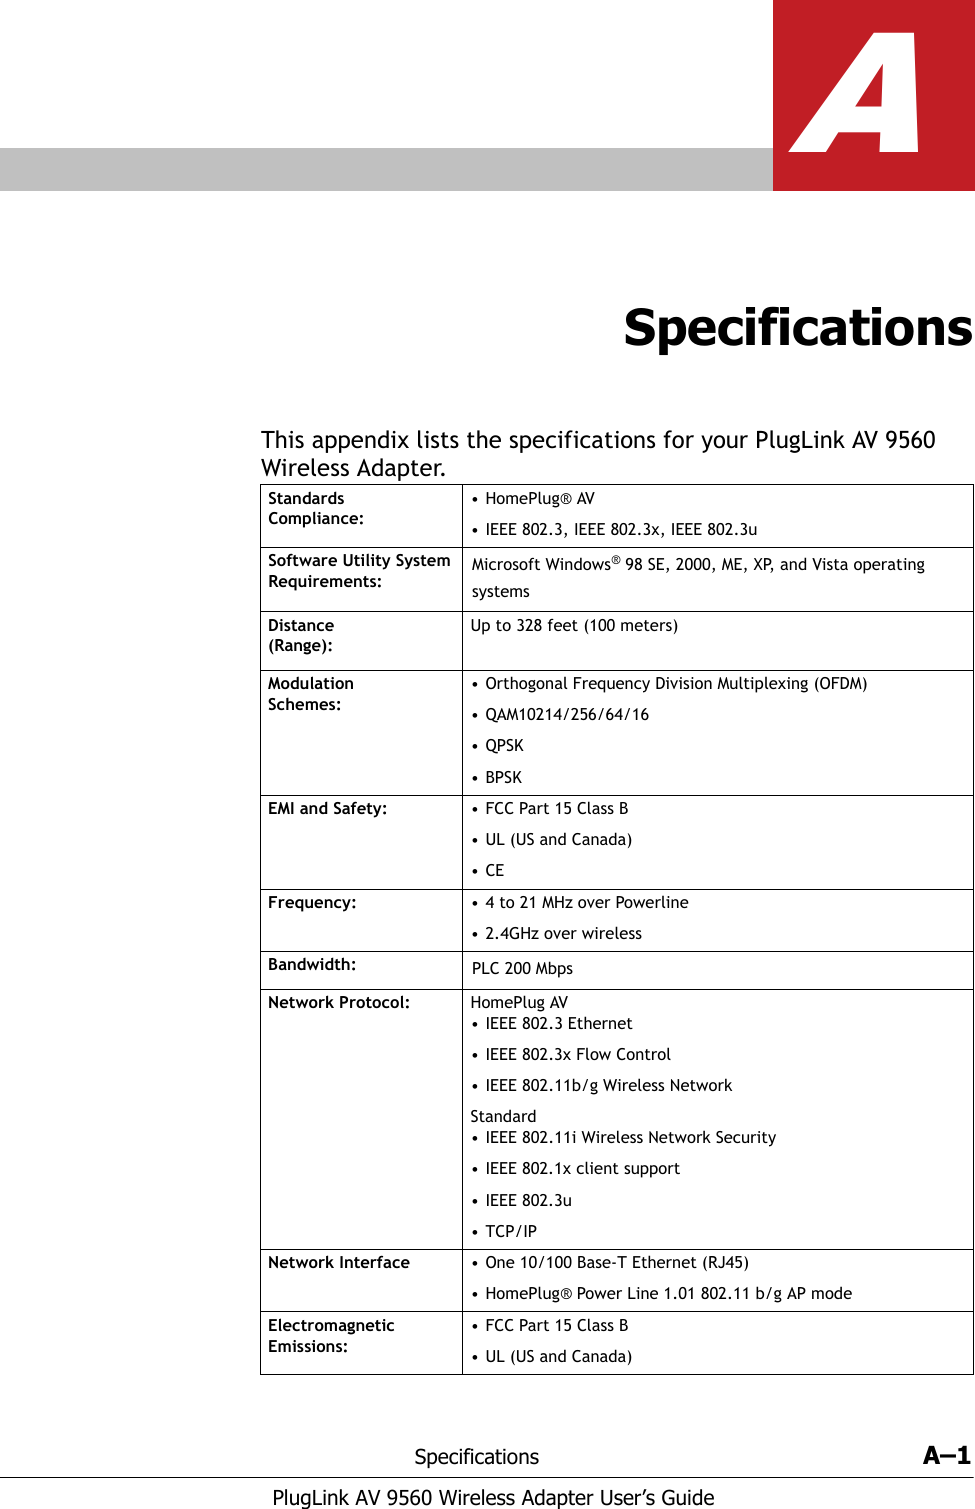 Specifications A–1PlugLink AV 9560 Wireless Adapter User’s GuideASpecificationsThis appendix lists the specifications for your PlugLink AV 9560 Wireless Adapter.Standards Compliance:•HomePlug® AV• IEEE 802.3, IEEE 802.3x, IEEE 802.3uSoftware Utility System Requirements:Microsoft Windows® 98 SE, 2000, ME, XP, and Vista operating systemsDistance(Range):Up to 328 feet (100 meters)Modulation Schemes:• Orthogonal Frequency Division Multiplexing (OFDM)• QAM10214/256/64/16•QPSK•BPSKEMI and Safety: • FCC Part 15 Class B•UL (US and Canada)•CEFrequency: • 4 to 21 MHz over Powerline• 2.4GHz over wirelessBandwidth:  PLC 200 MbpsNetwork Protocol: HomePlug AV• IEEE 802.3 Ethernet• IEEE 802.3x Flow Control• IEEE 802.11b/g Wireless Network Standard• IEEE 802.11i Wireless Network Security• IEEE 802.1x client support• IEEE 802.3u•TCP/IPNetwork Interface • One 10/100 Base-T Ethernet (RJ45)• HomePlug® Power Line 1.01 802.11 b/g AP modeElectromagnetic Emissions:• FCC Part 15 Class B•UL (US and Canada)